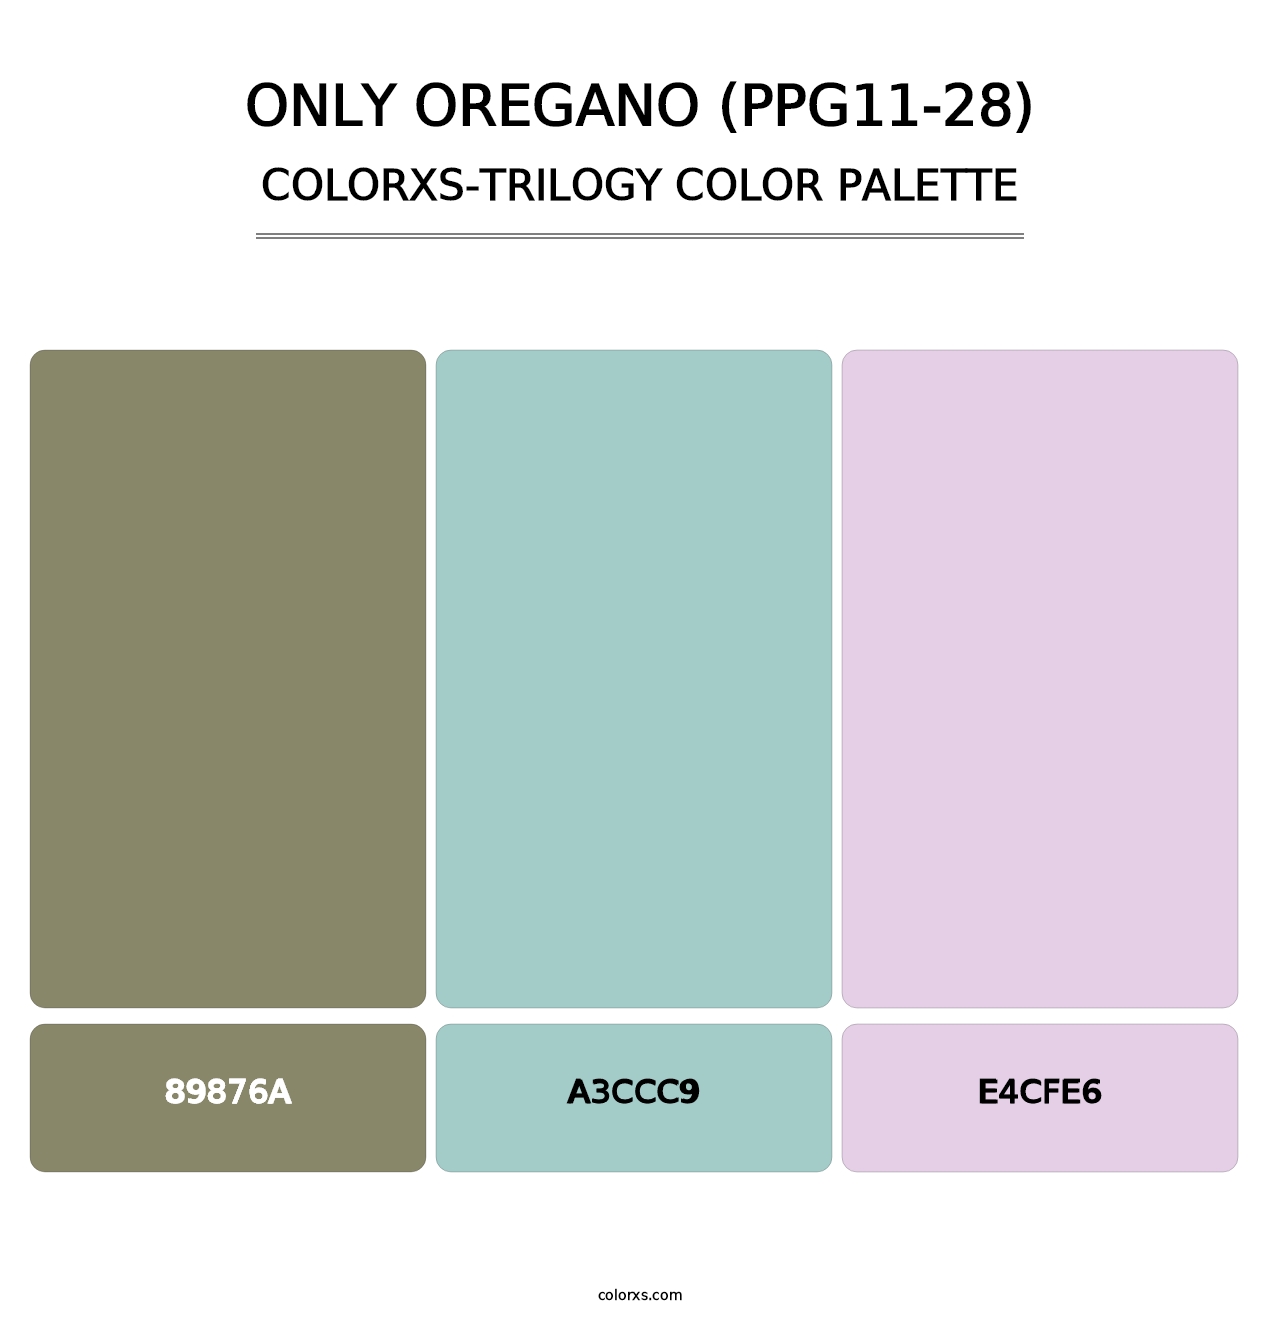 Only Oregano (PPG11-28) - Colorxs Trilogy Palette